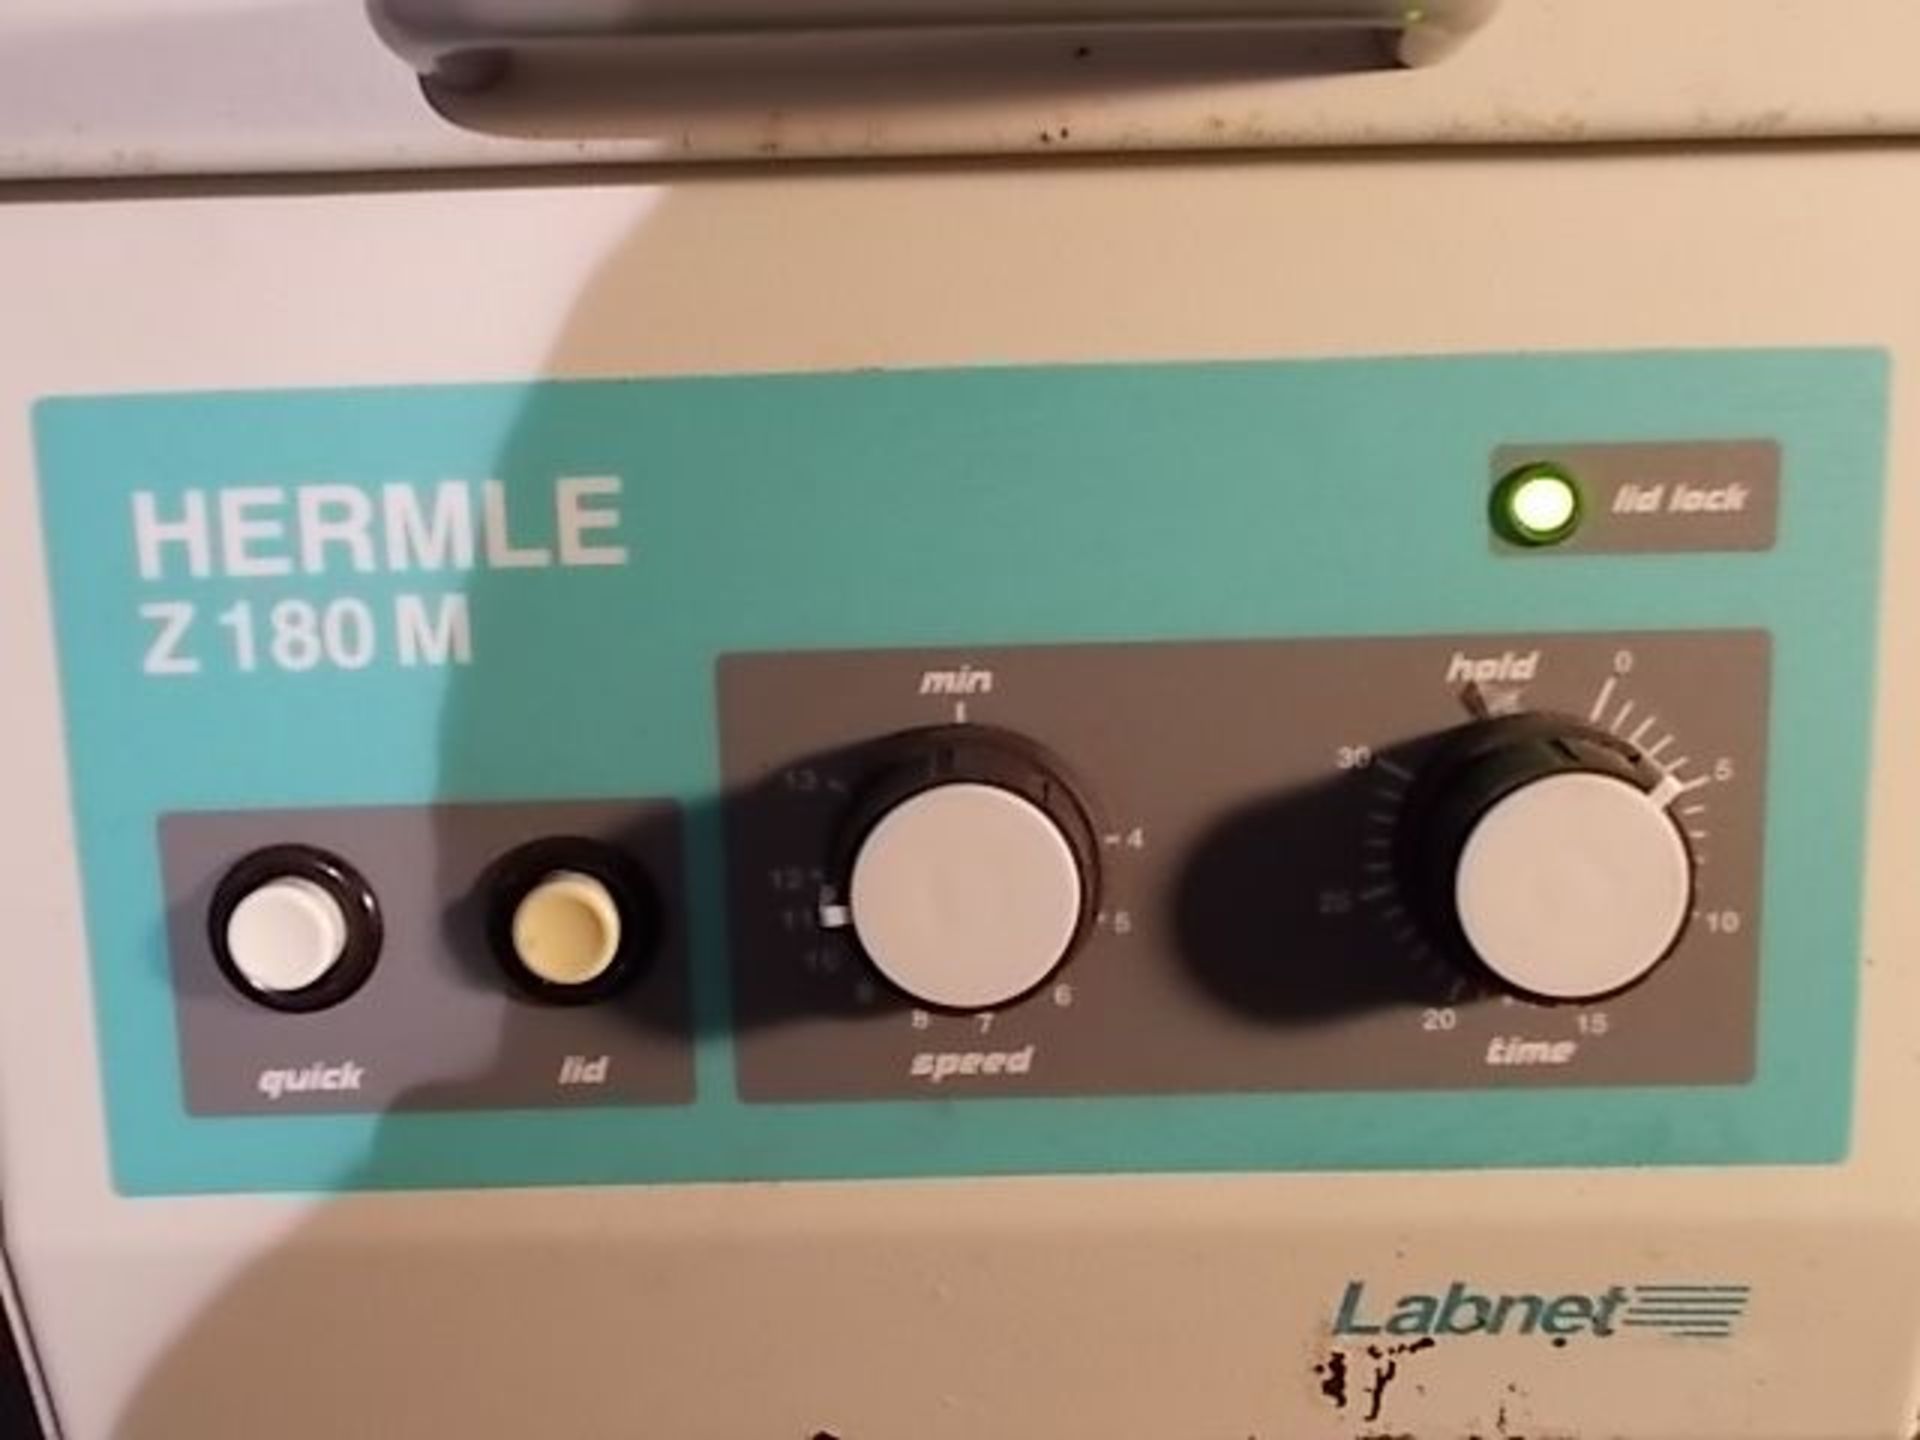 Labnet Hermle Z 180 M Cetrifuge w/ 24 Place Rotor, Qty 1, 330913017522 - Image 2 of 8